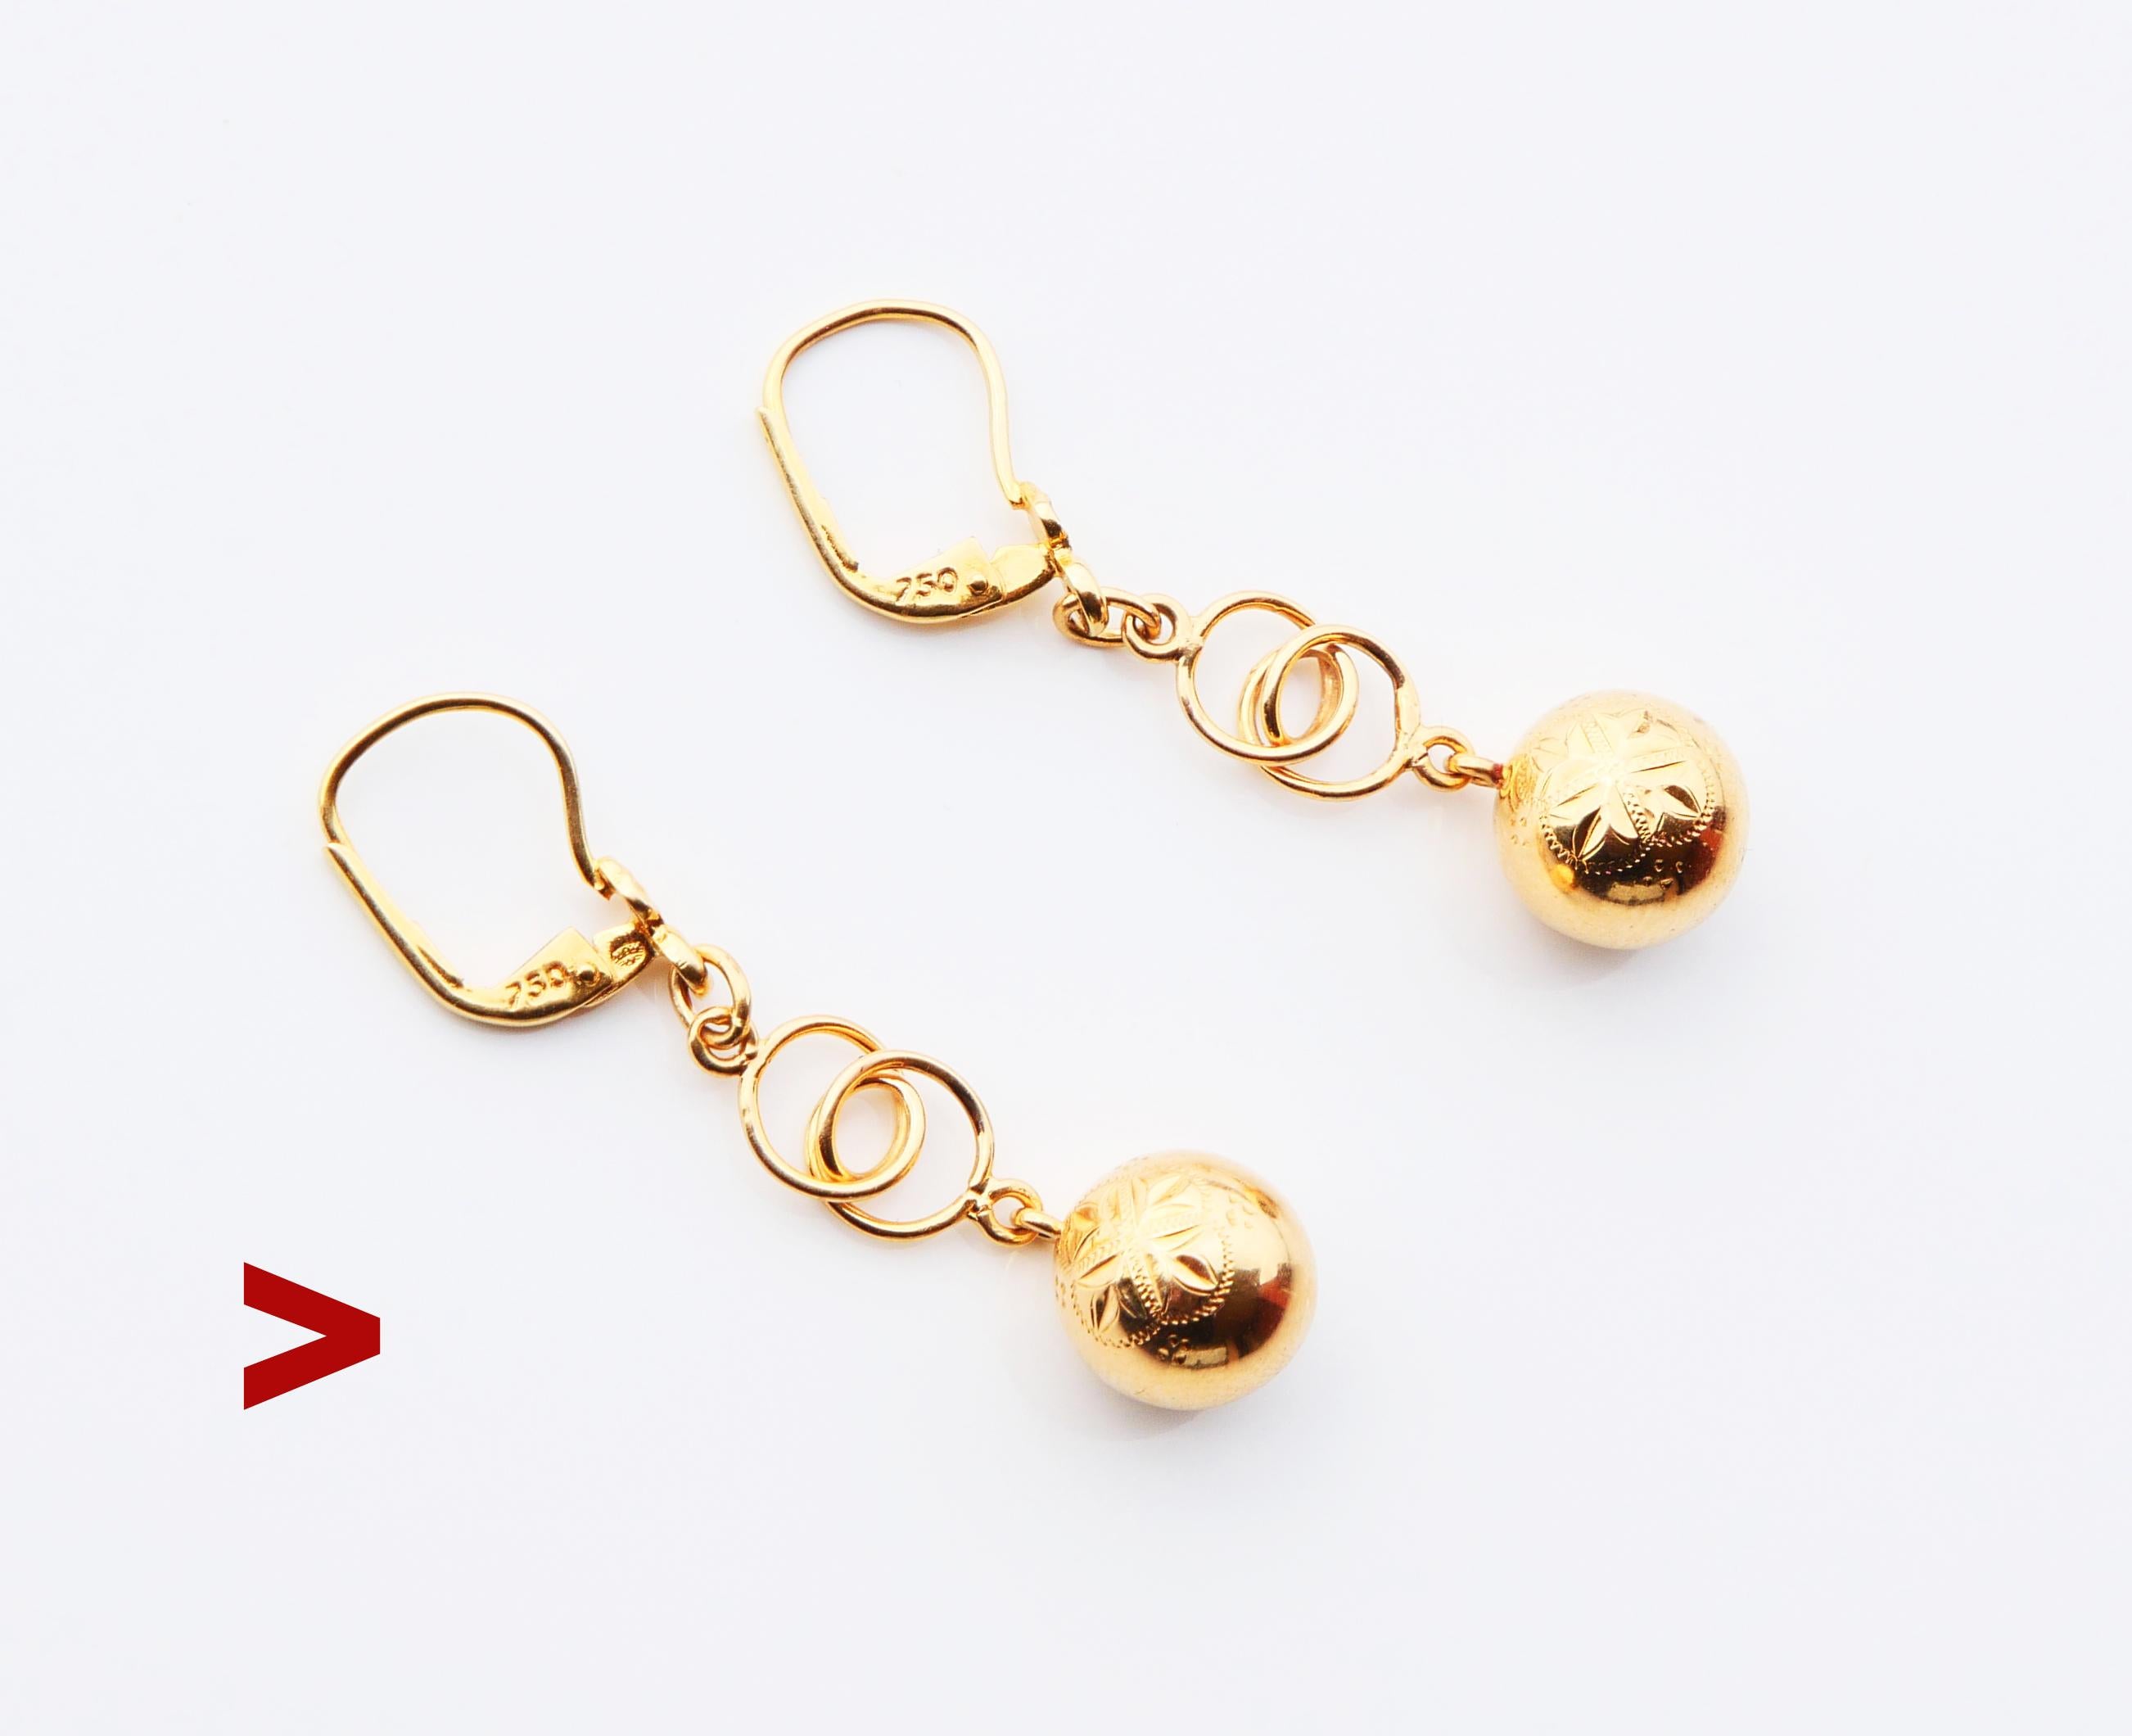 A pair of Earrings with chained shiny balls made ca. 1920s -1930s. Delicately engraved ornaments of Octagonal eight-angled stars on the front sides.

750 hallmarks on hooks, metal was tested solid 18K Yellow Gold.

Each earring is 40 mm long and